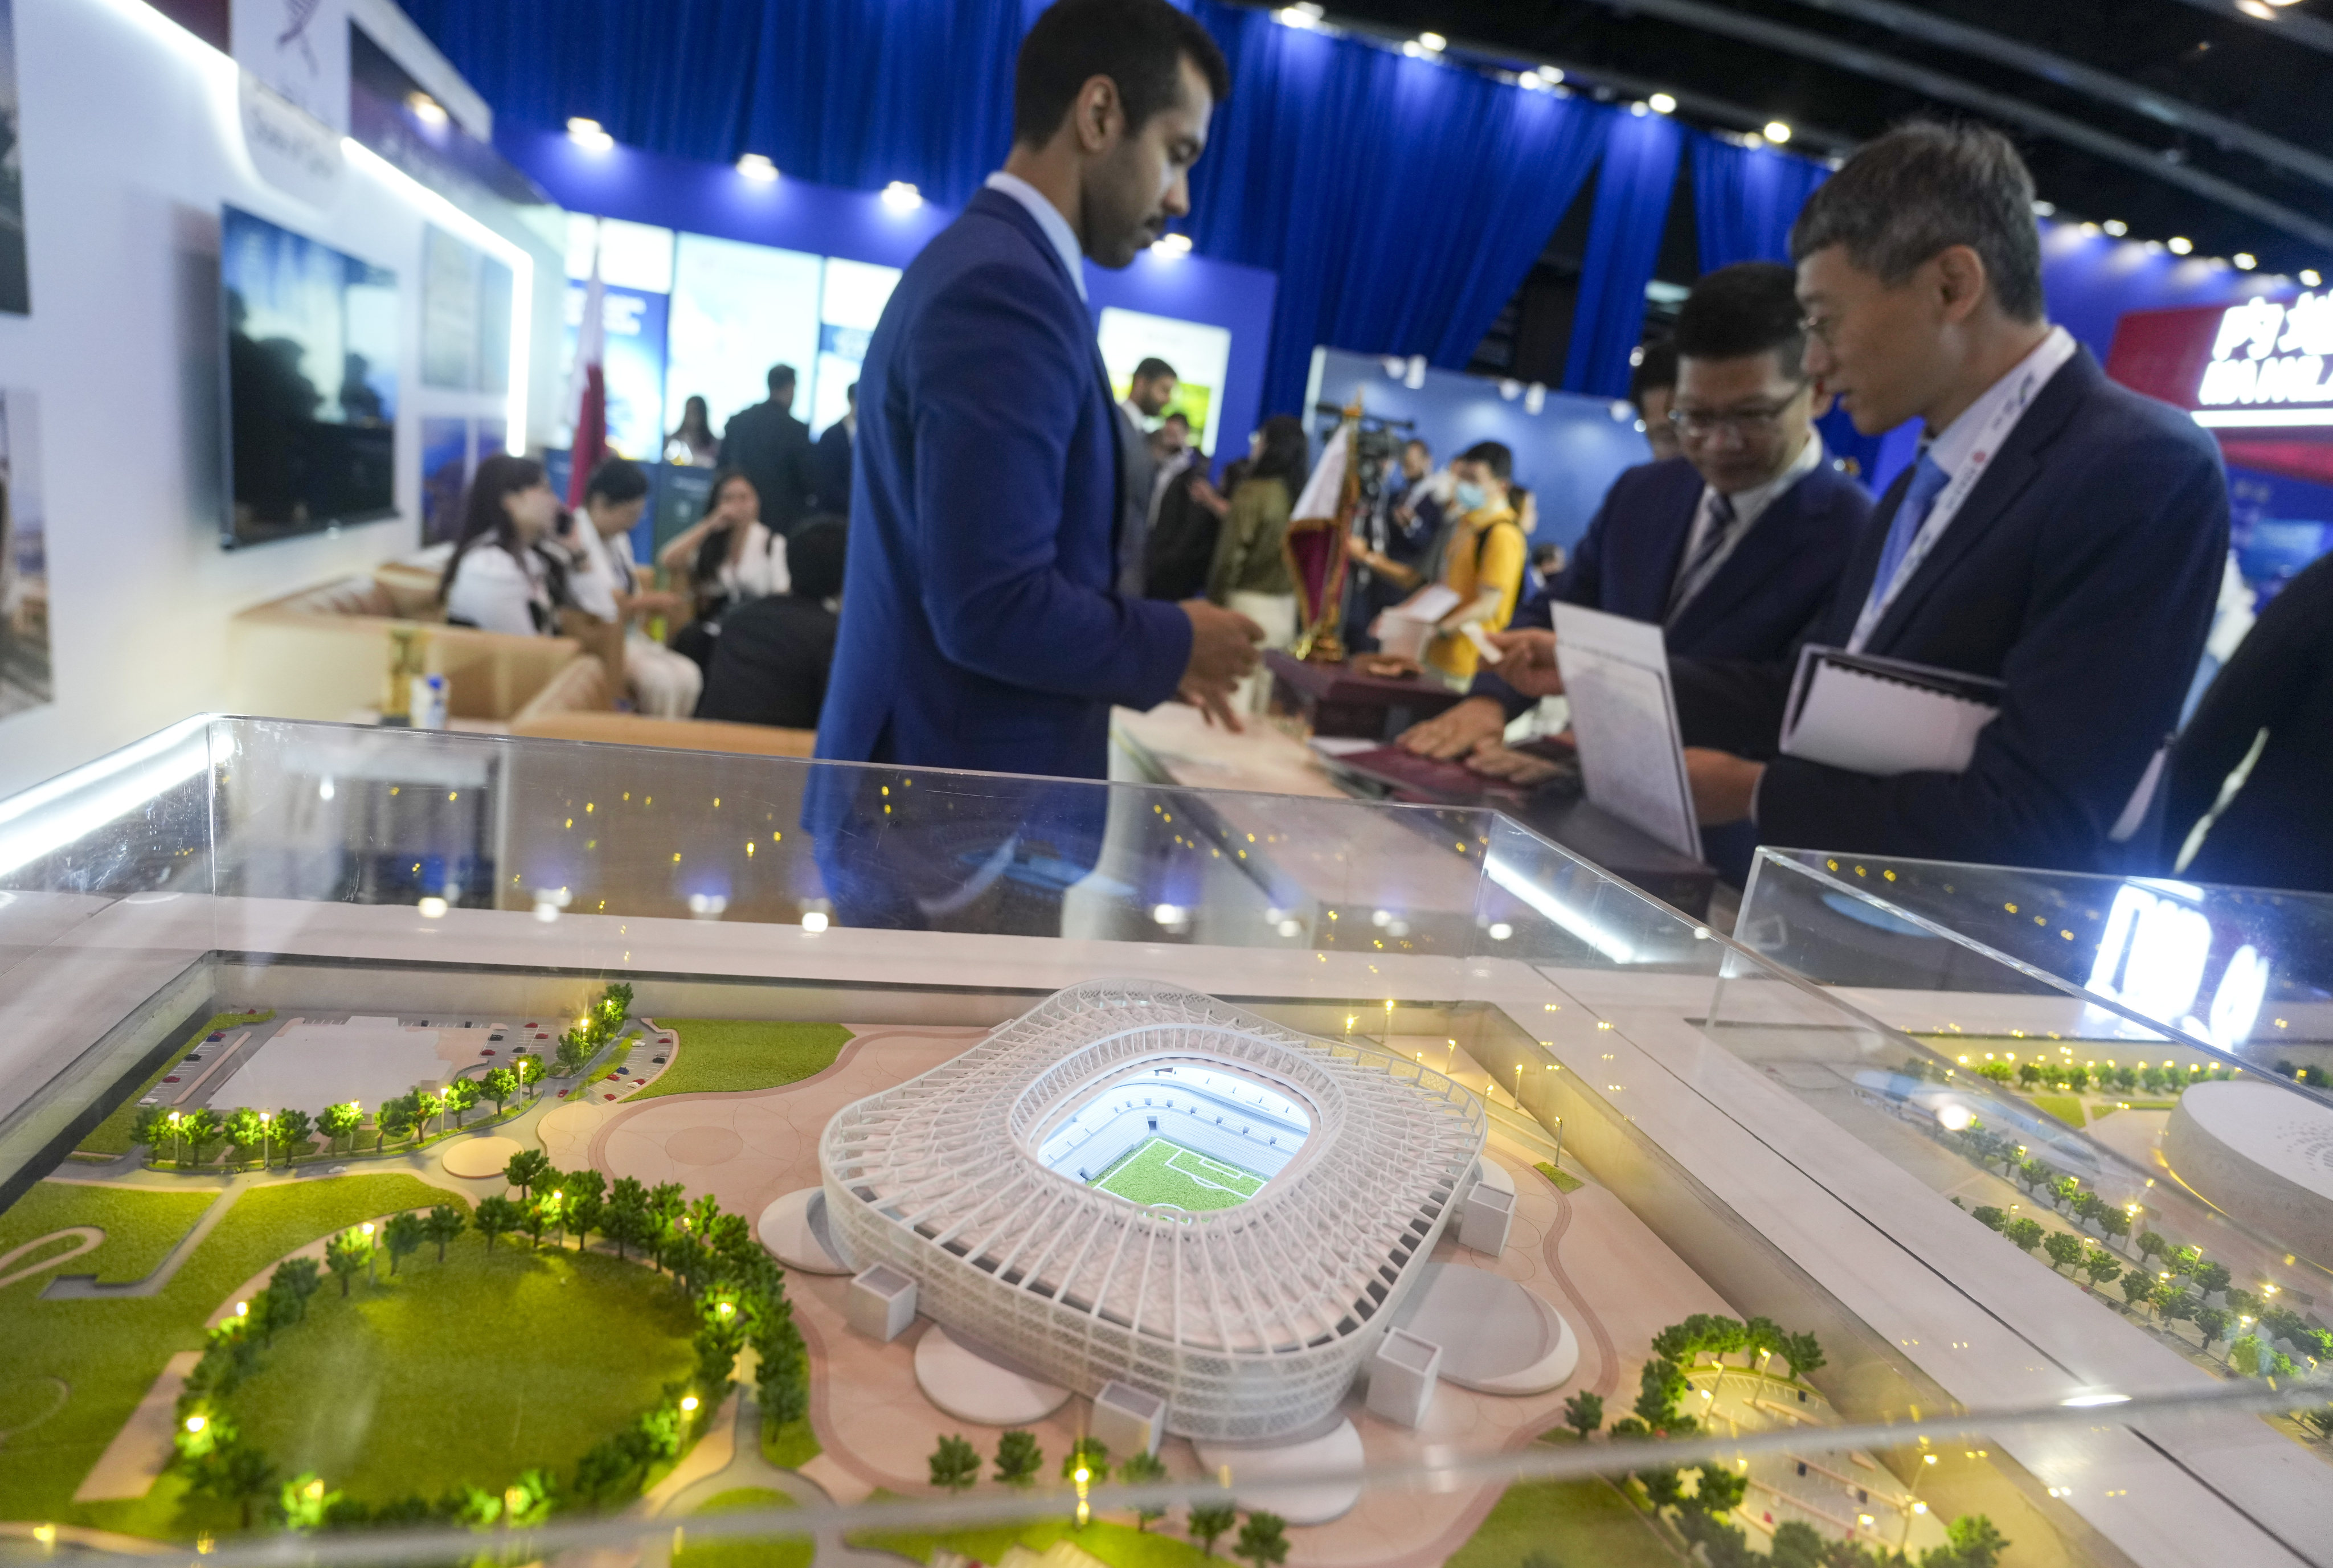 Infrastructure projects are displayed at the Belt and Road Summit in Hong Kong on Wednesday. Photo: Sam Tsang